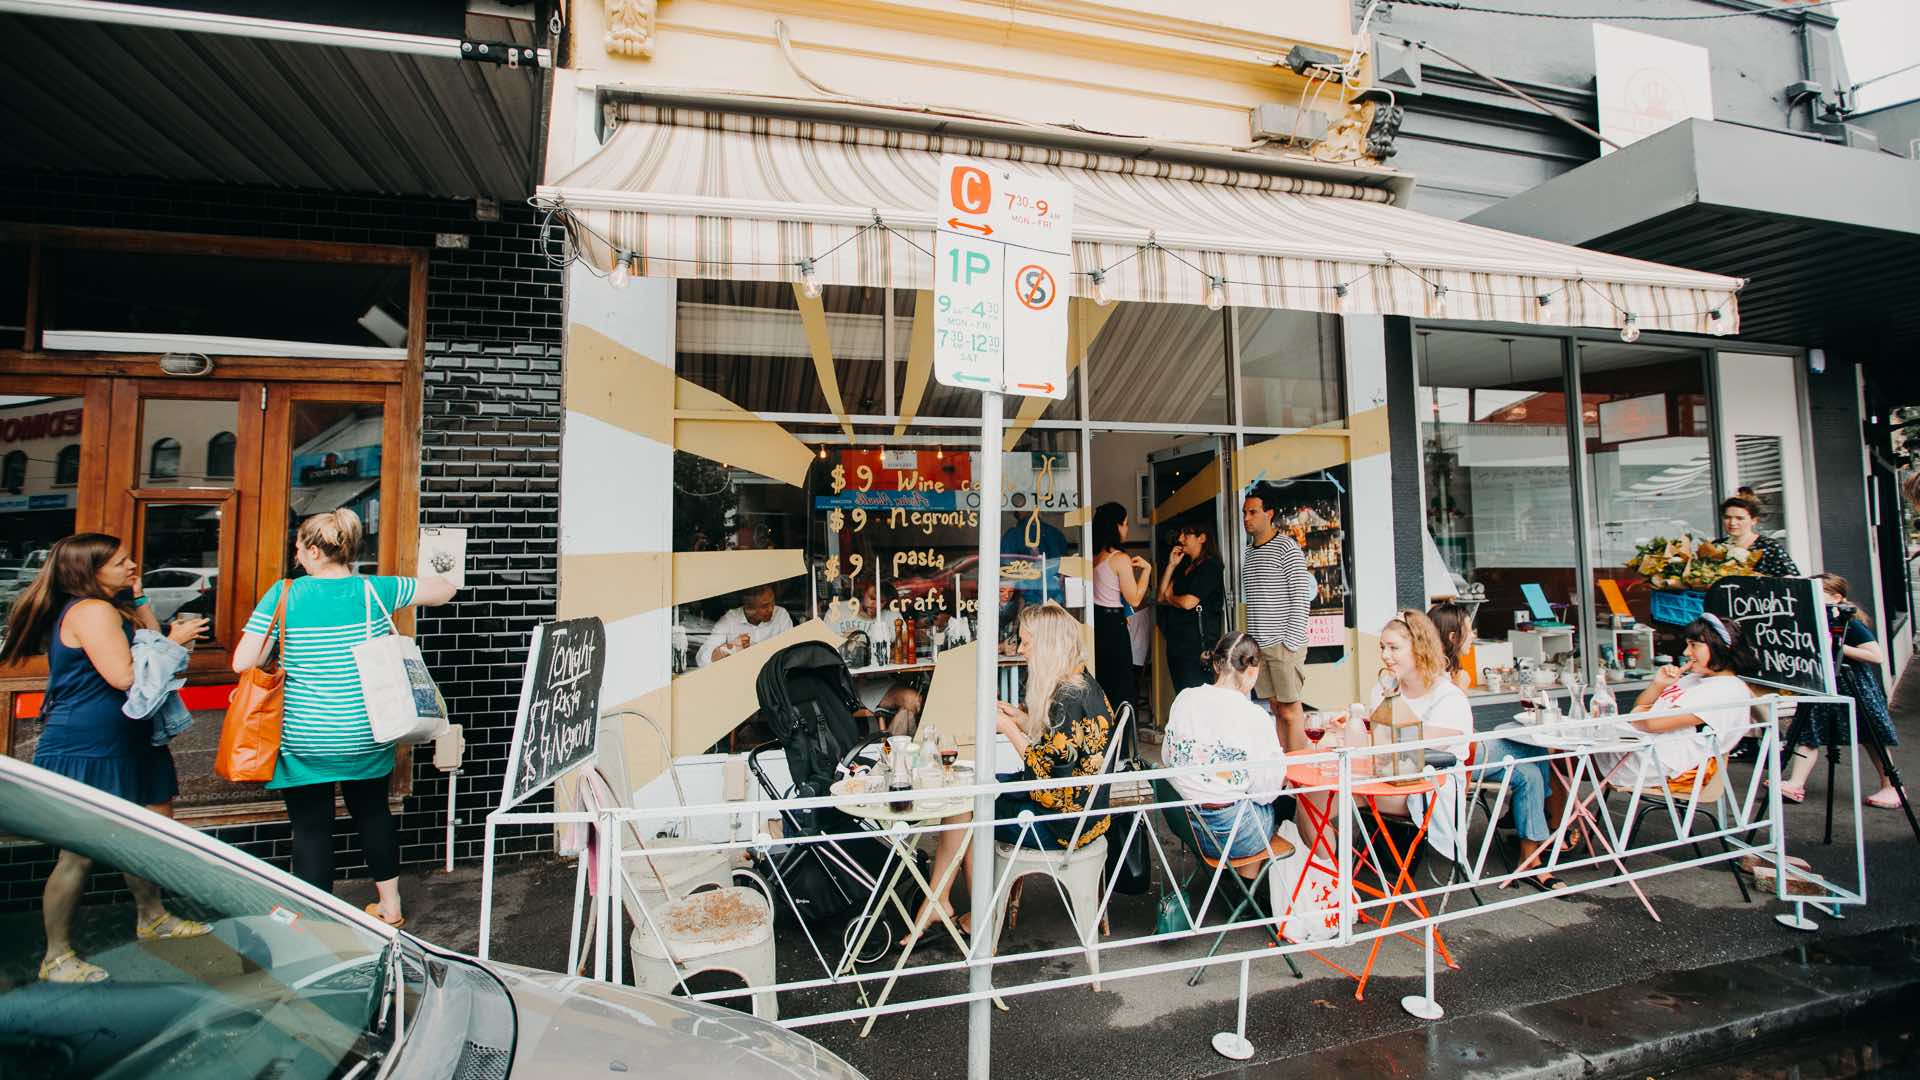 The City of Melbourne Is Looking to Turn Closed-Down Streets Into Outdoor Dining Spaces